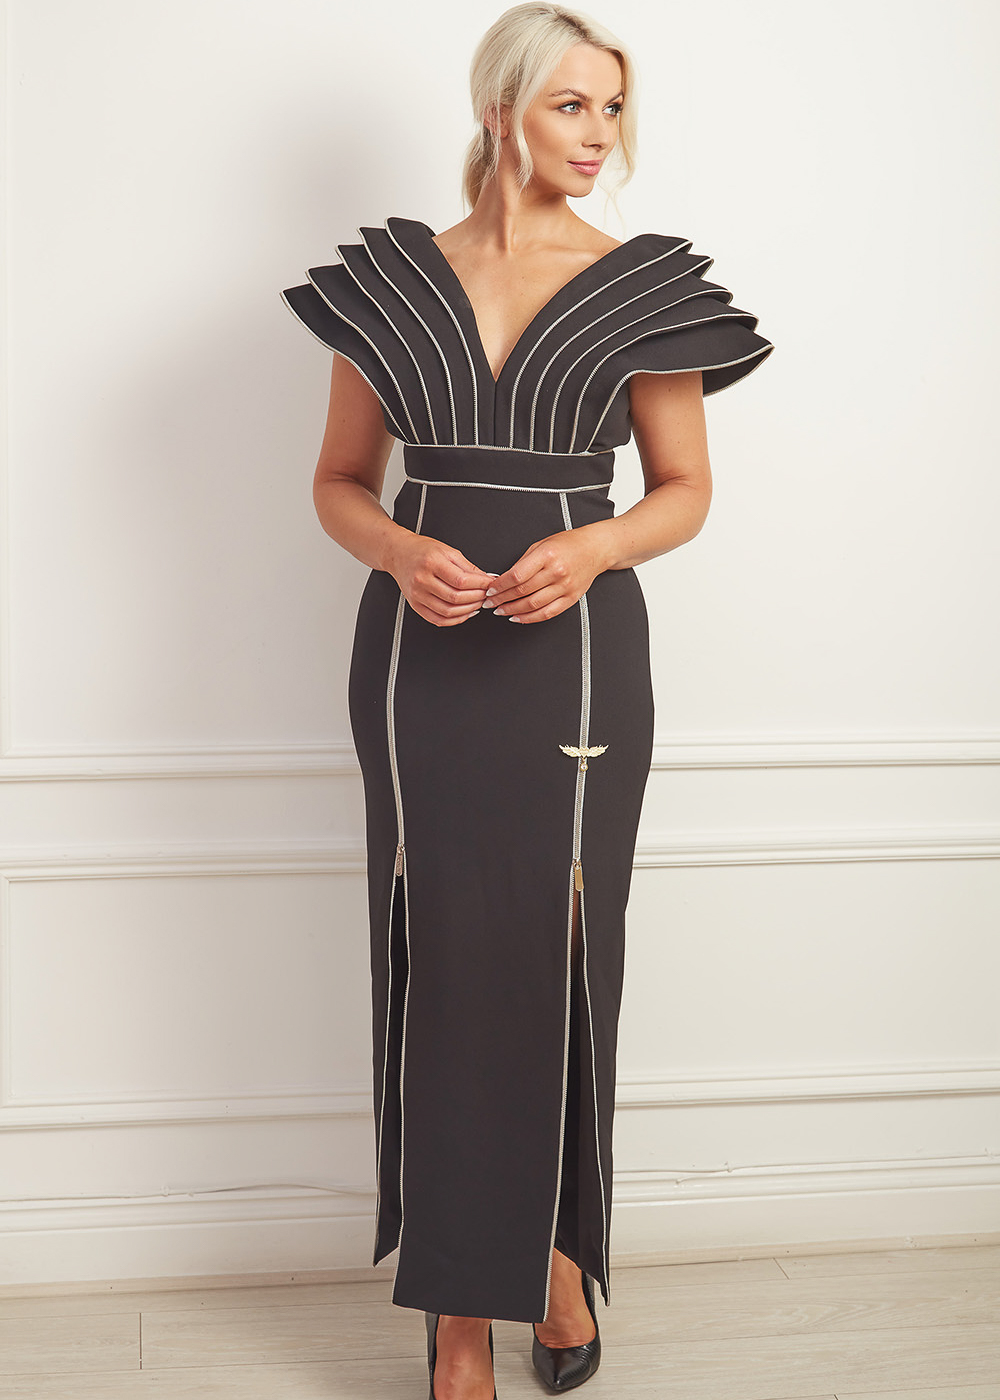 Black column gown with dramatic shoulders and silver zip detailing